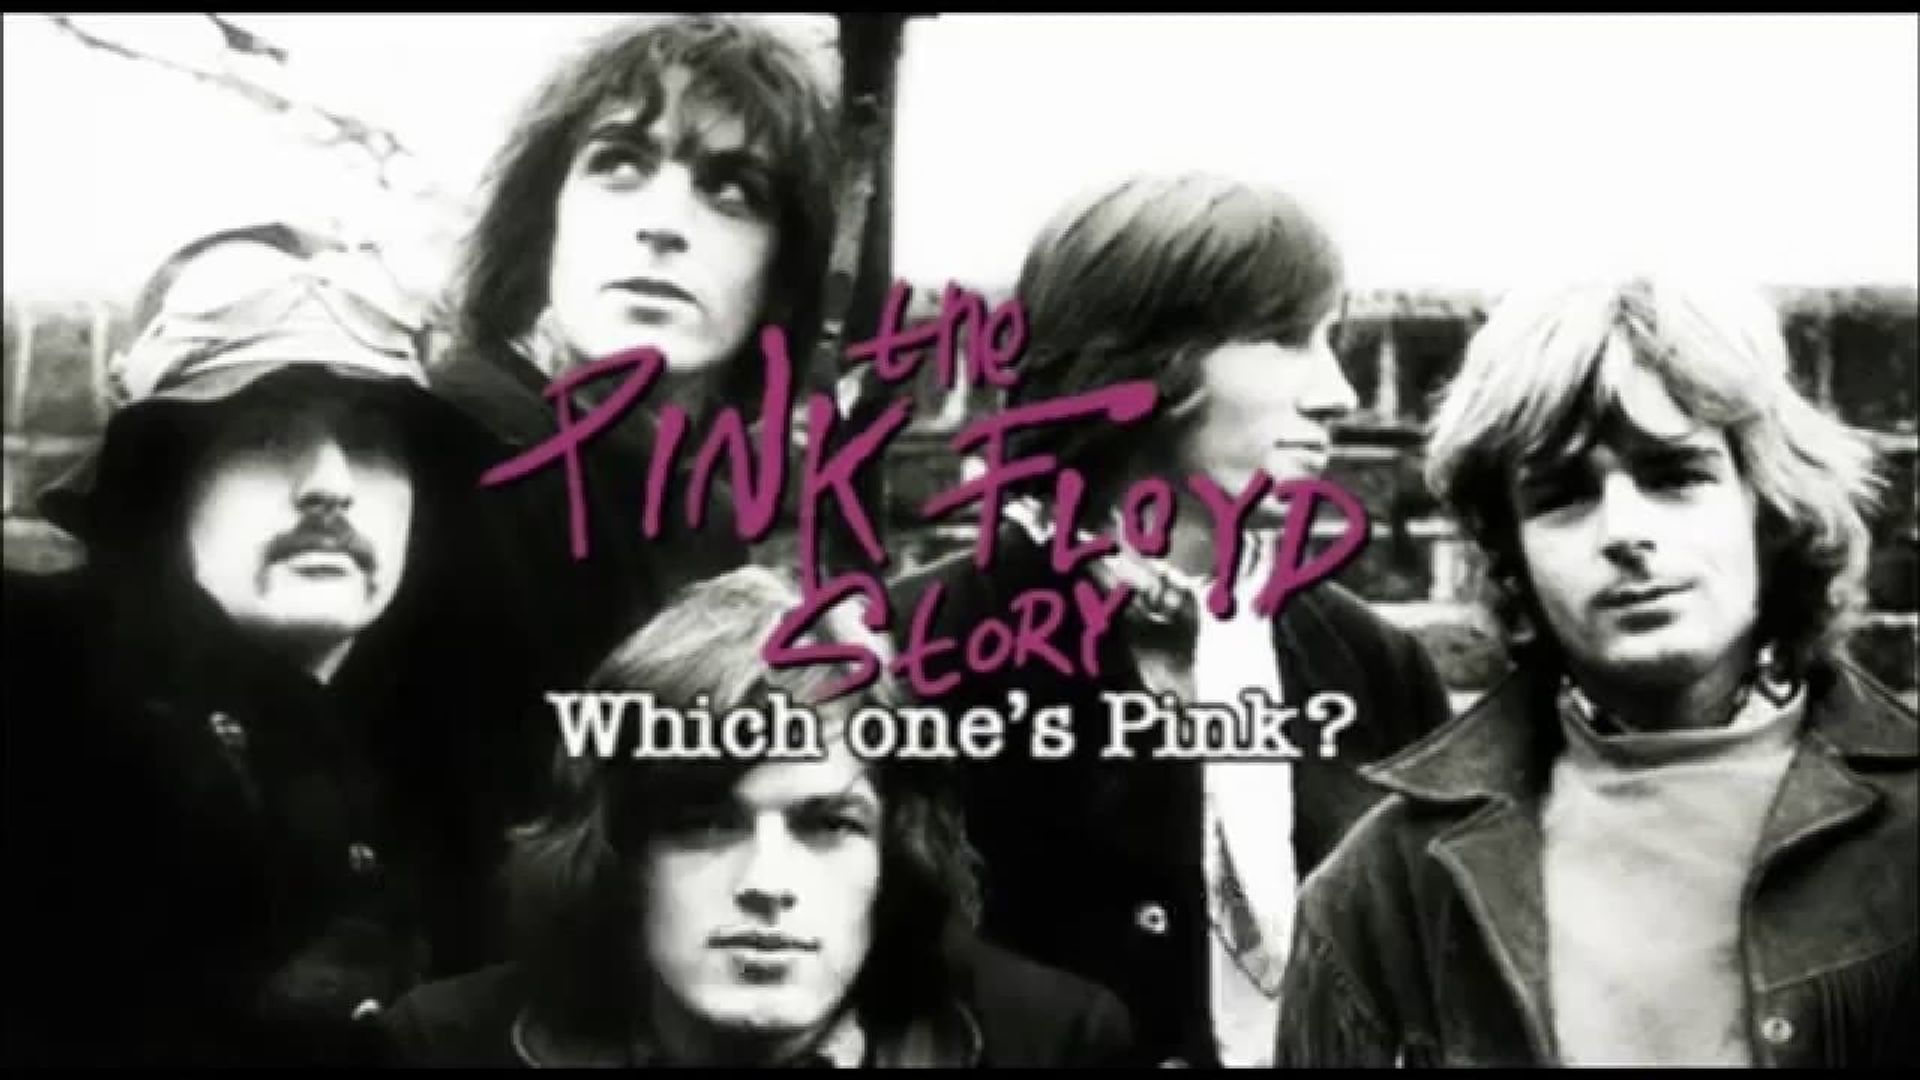 The Pink Floyd Story: Which One's Pink? background